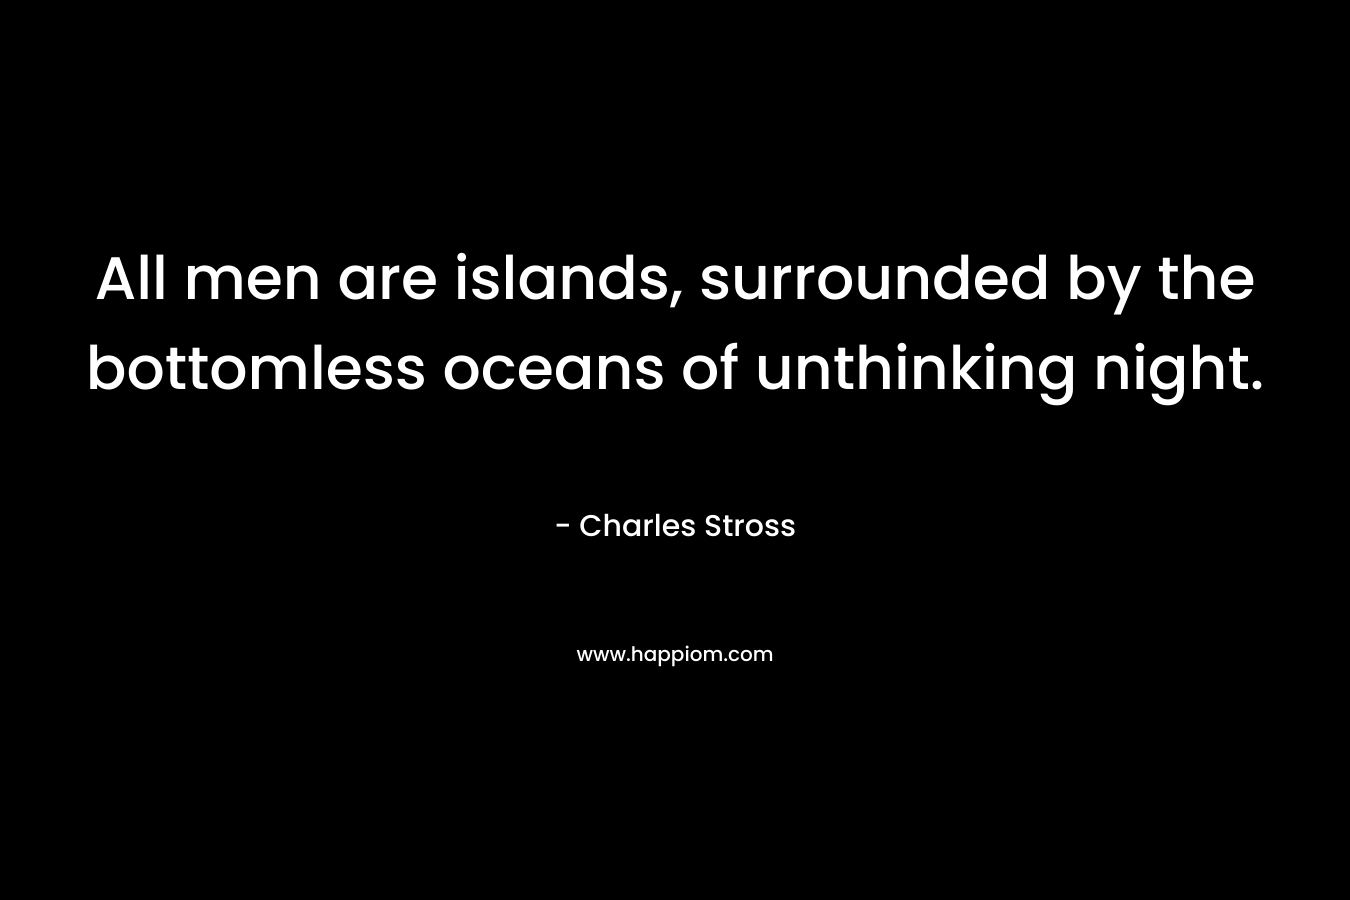 All men are islands, surrounded by the bottomless oceans of unthinking night. – Charles Stross